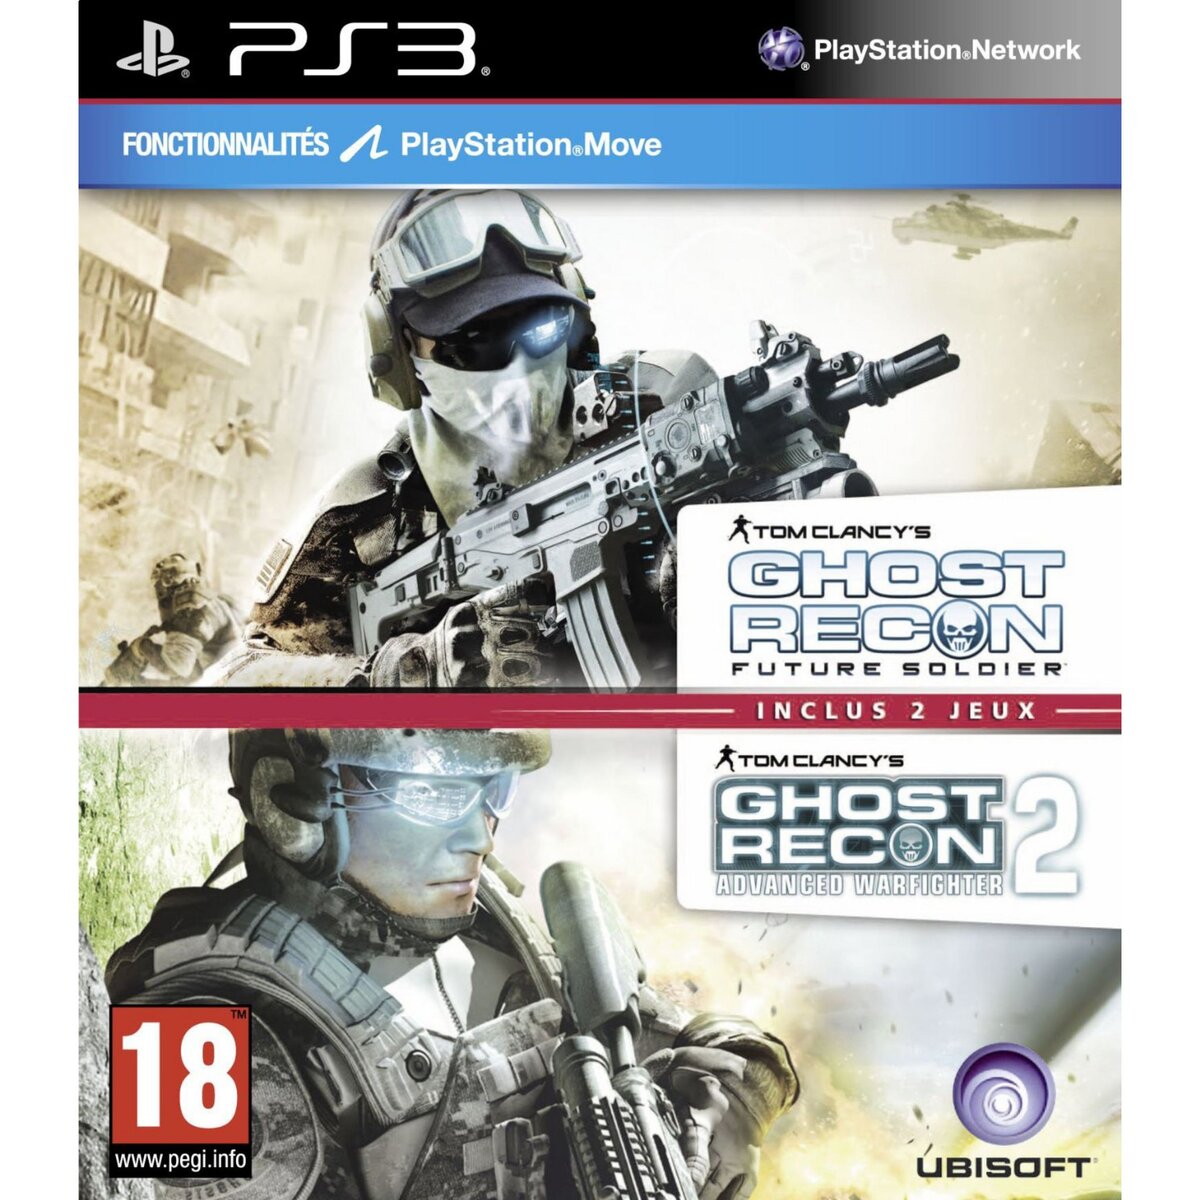 Pack 2 jeux Ghost Recon PS3